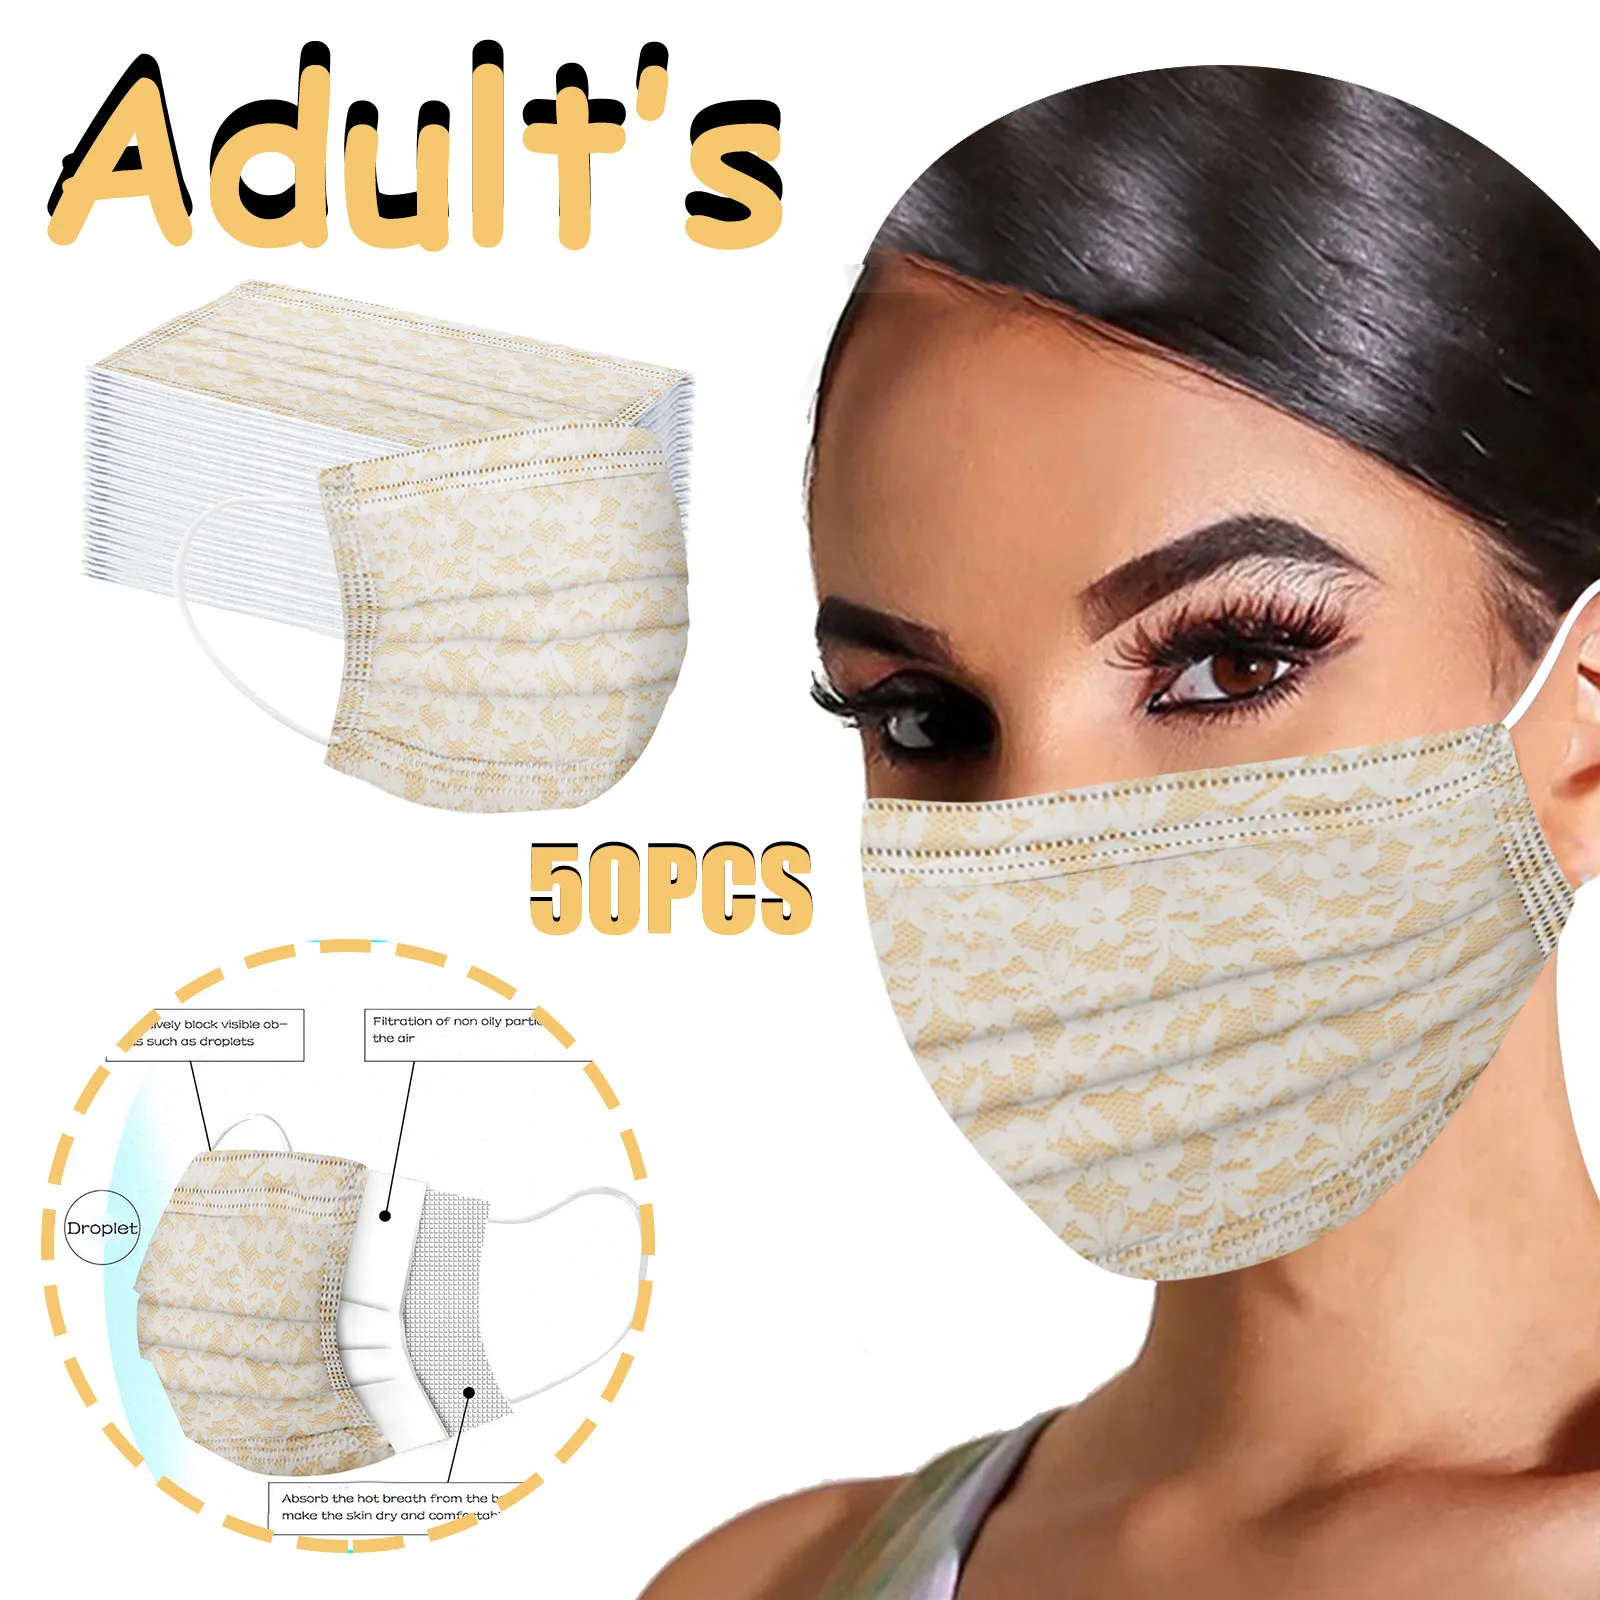 50pcs Floral Print Adults Masks Disposable Face Masks 3ply Loop Meltblown Non-woven Mouth Maks Halloween Cosplay Decor Props witch halloween costume